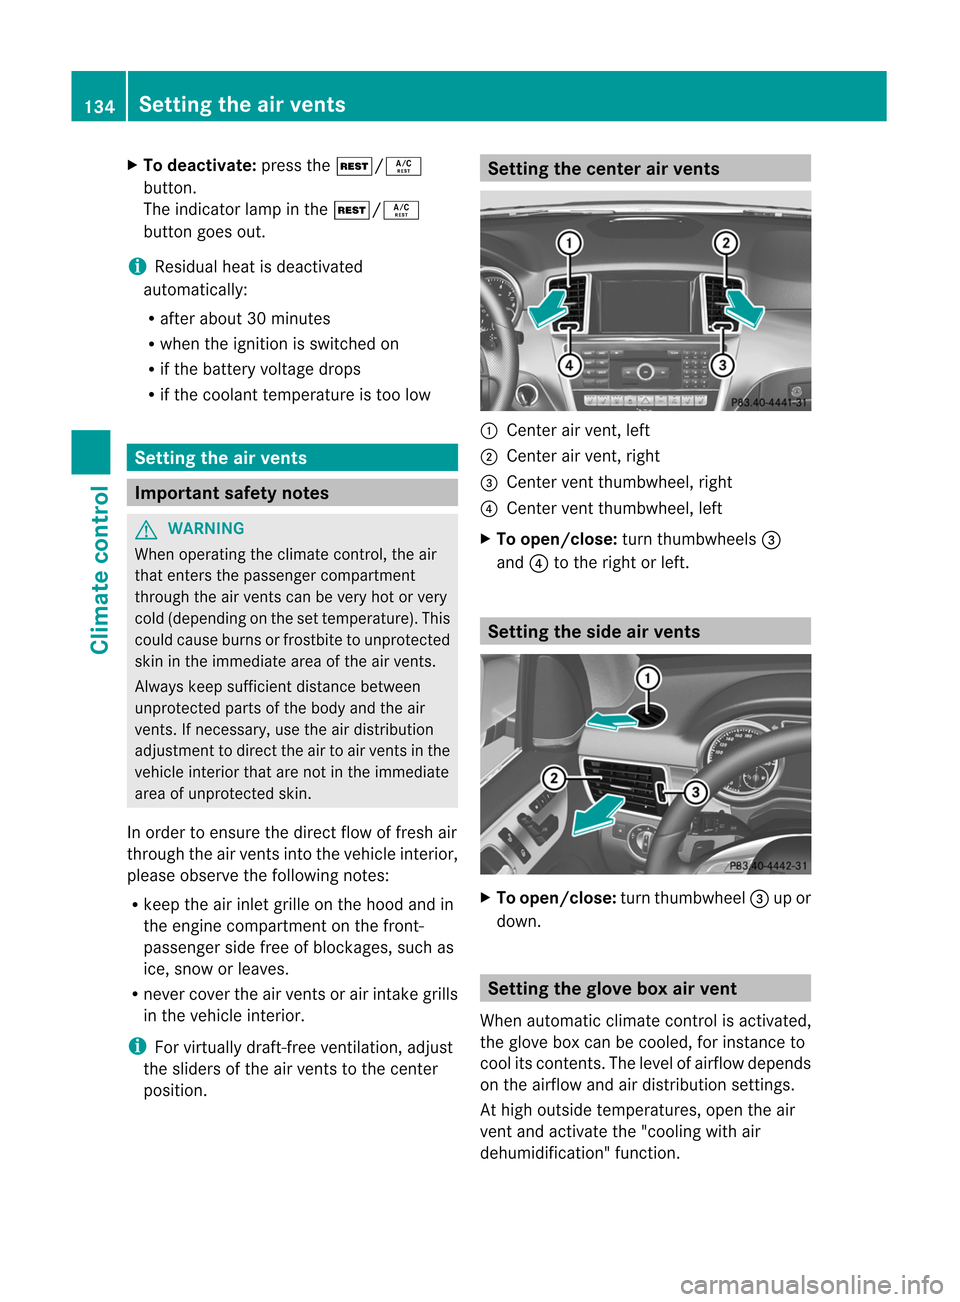 MERCEDES-BENZ M-Class 2012 W166 Owners Manual 
X
To dea ctivate :pre ssthe Ì/Á
bu tton.
The indicator lamp inthe Ì/Á
bu tton goesou t. i Re
sidu alhea tisdeactivated
automaticall y:
R after about30 minutes
R when theignition isswitched on
R i